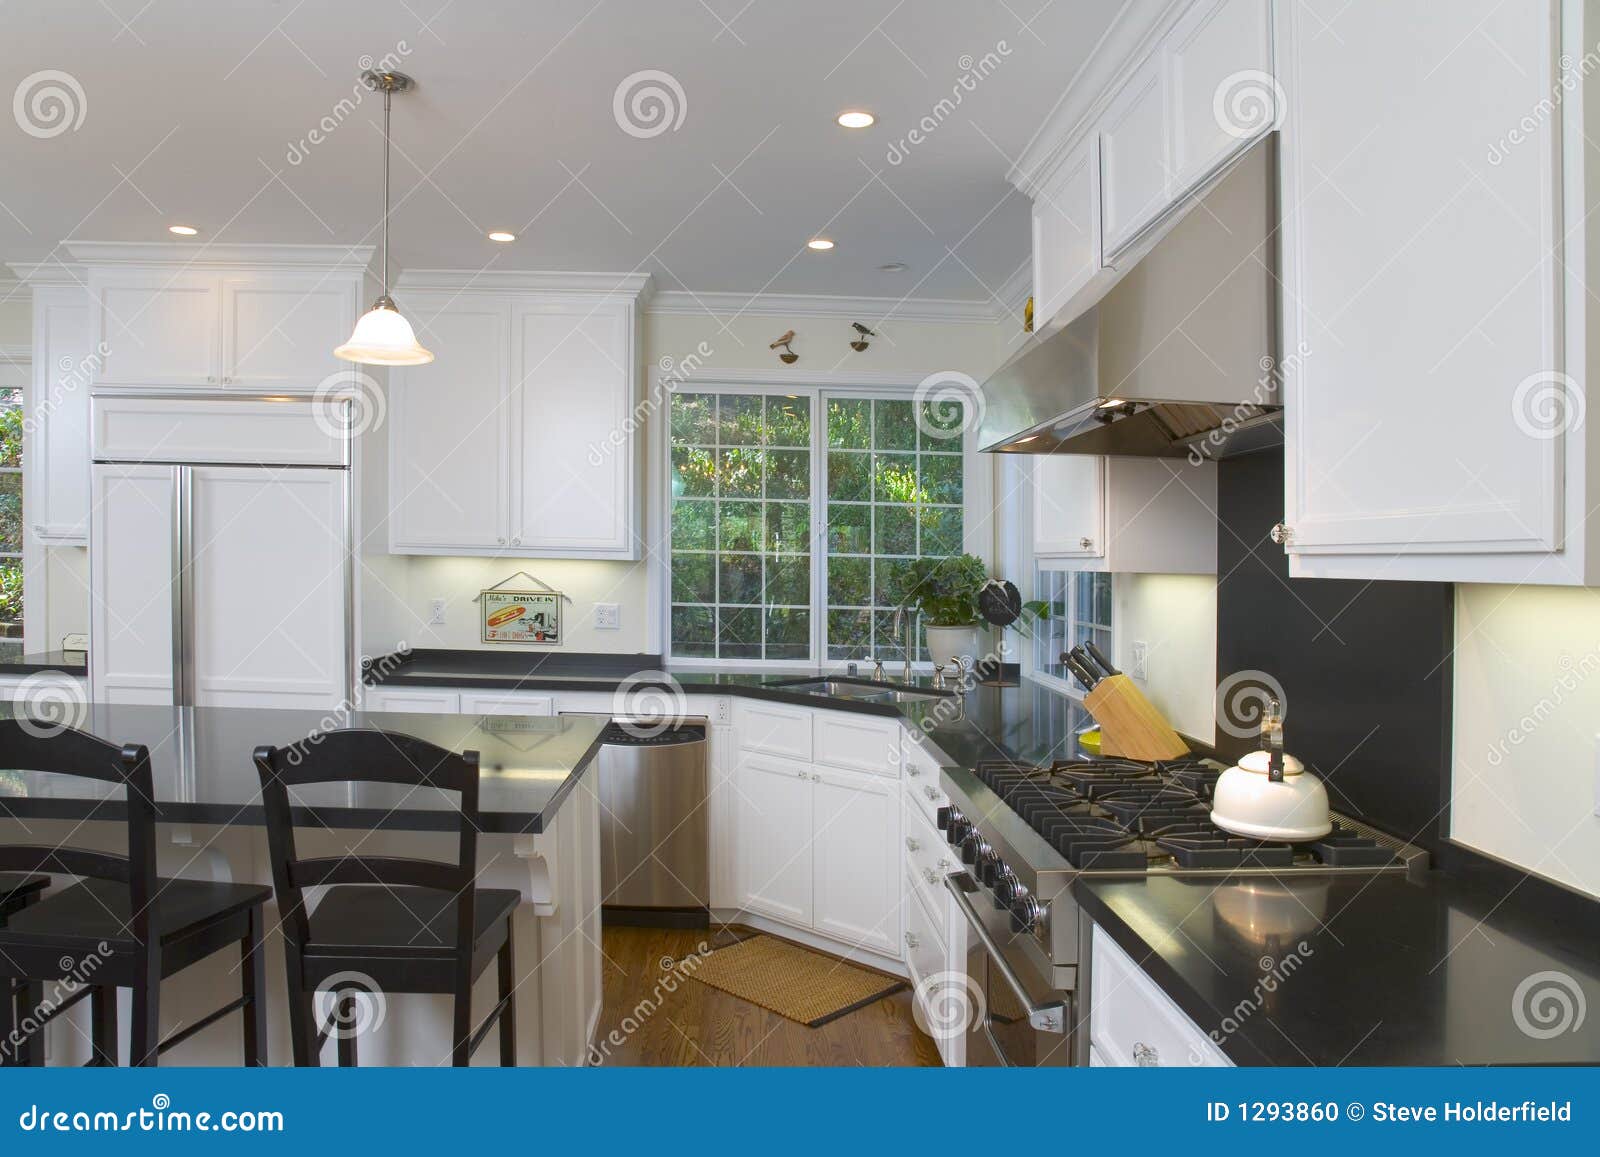 Newly Remodeled White Kitchen Stock Photo - Image of cook, saute: 1293860